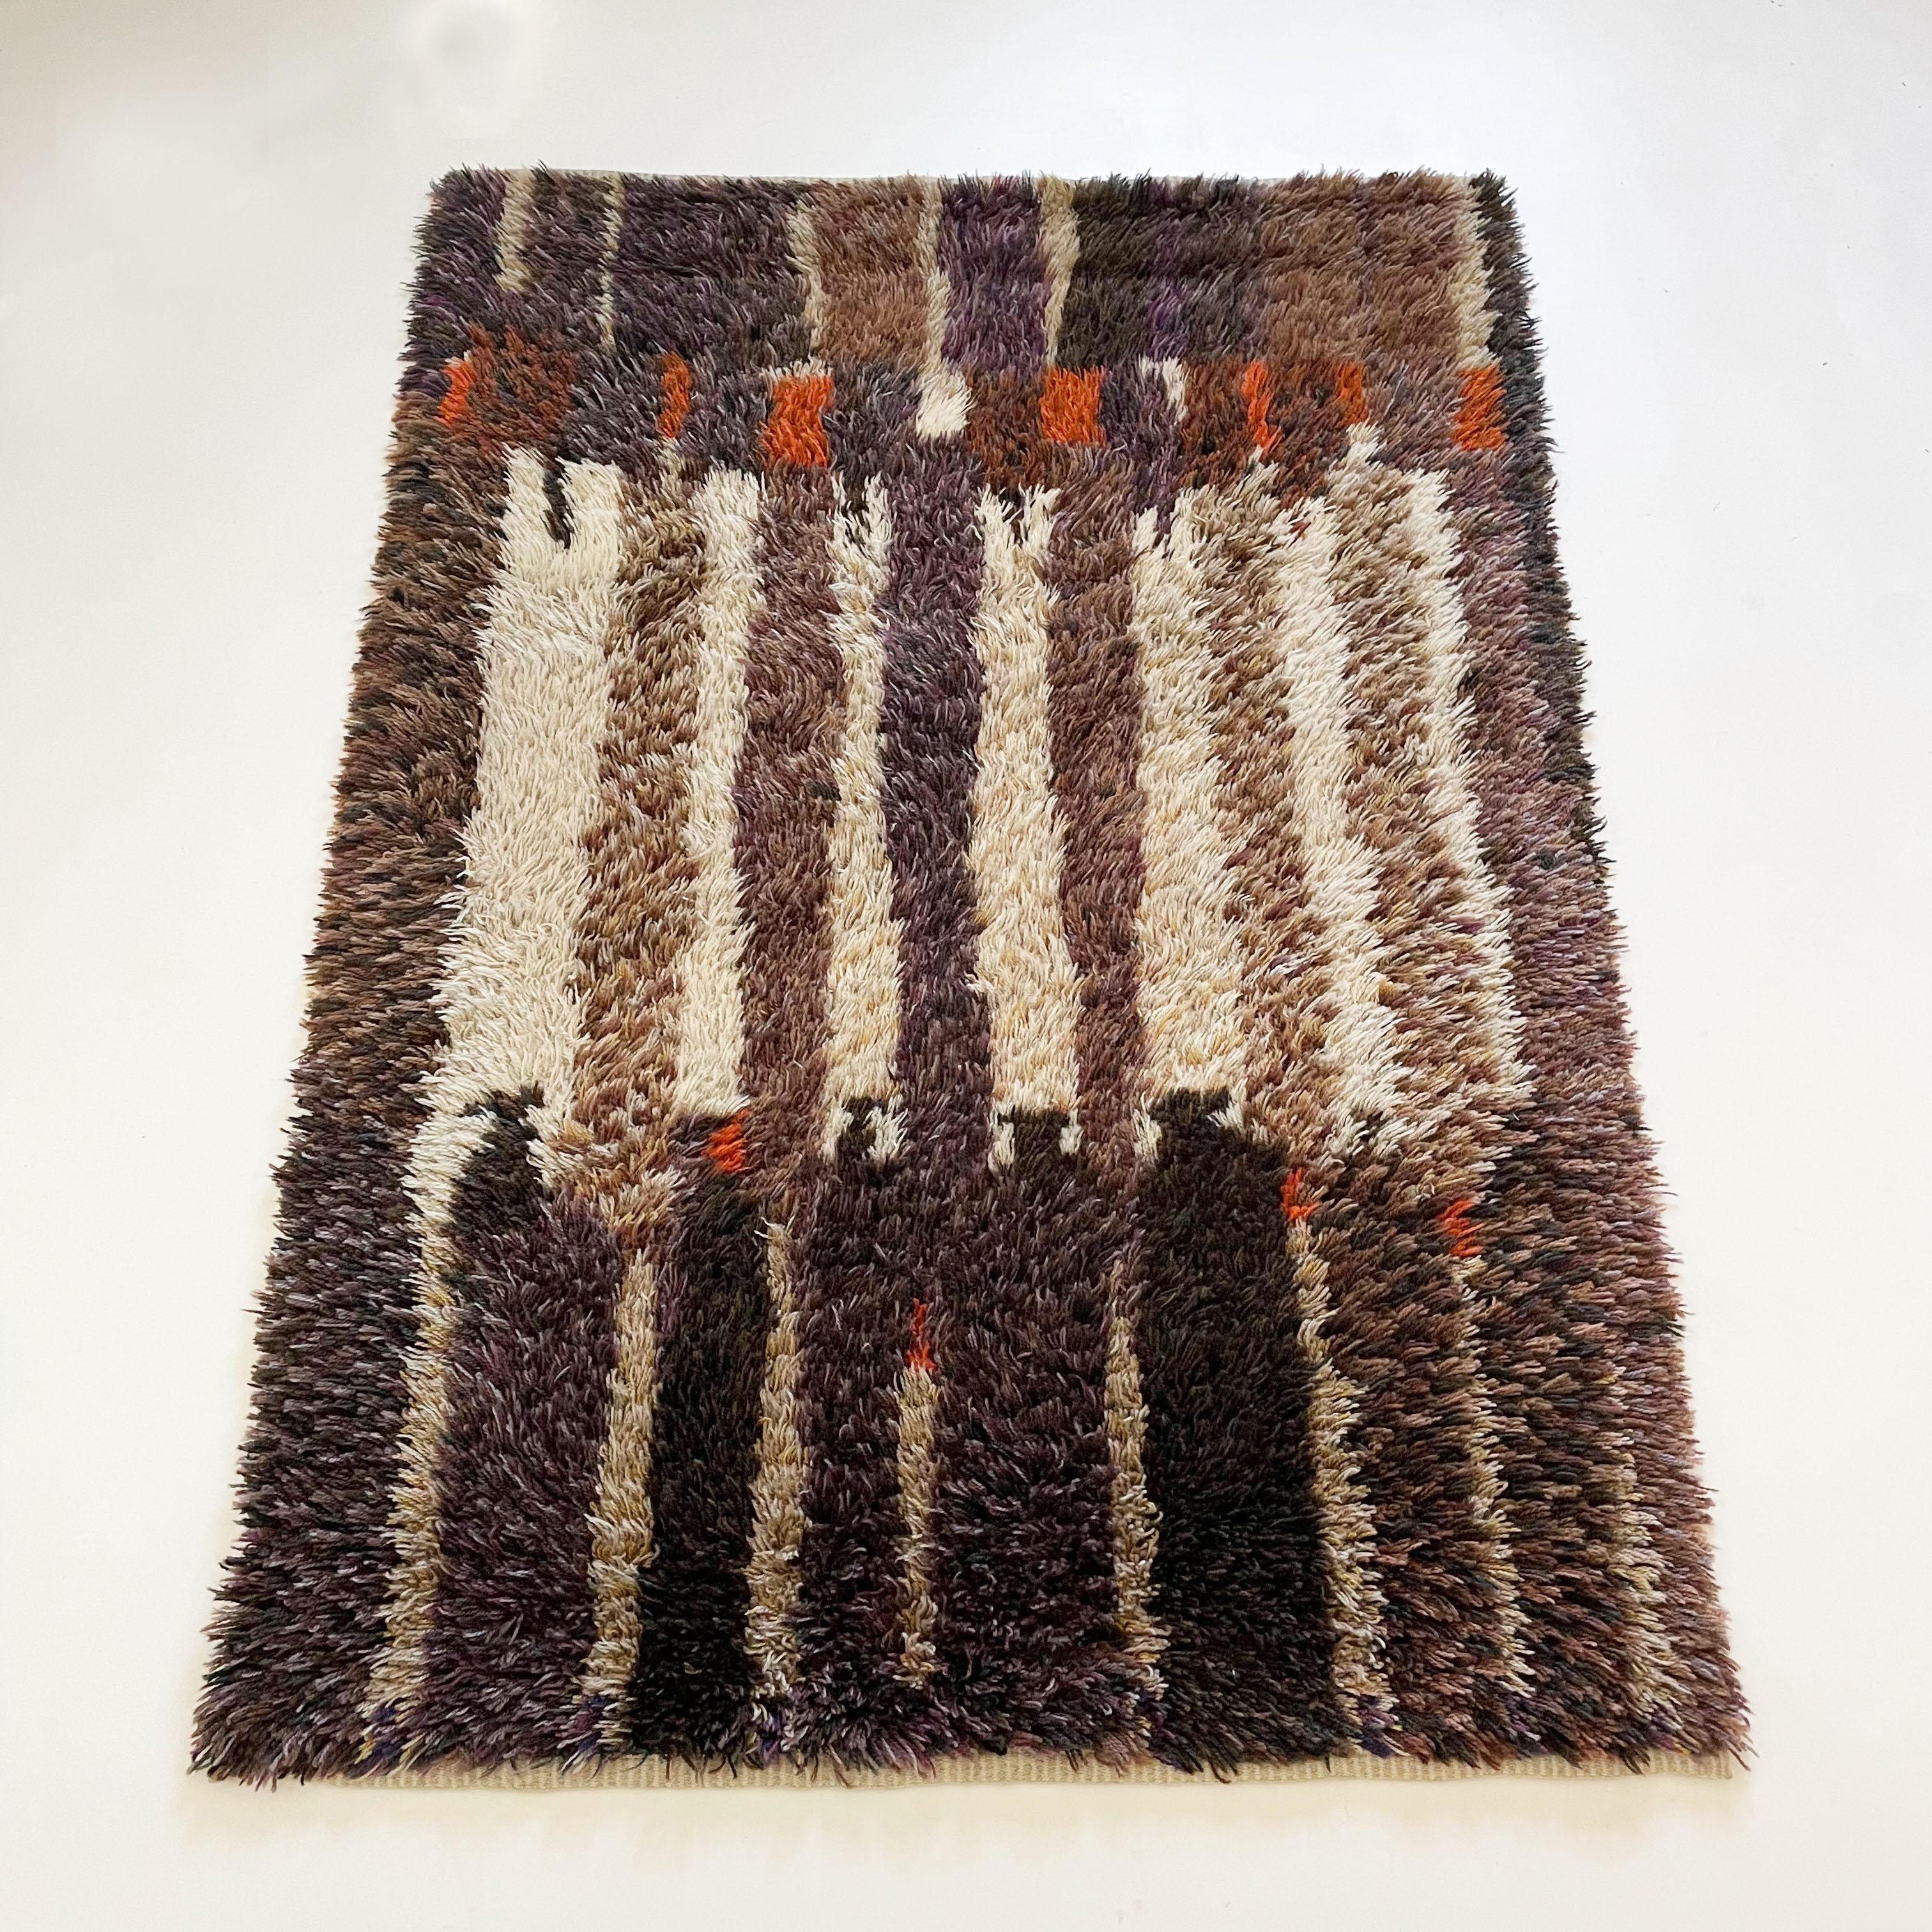 Article:

High pile Rya rug 


Decade:

1960s


Origin:

Scandinavia Sweden


Material:

100% wool



This rug is a great example of 1960s pop art interior. Made in high quality Rya weaving technique in Finland in the 1960s, it